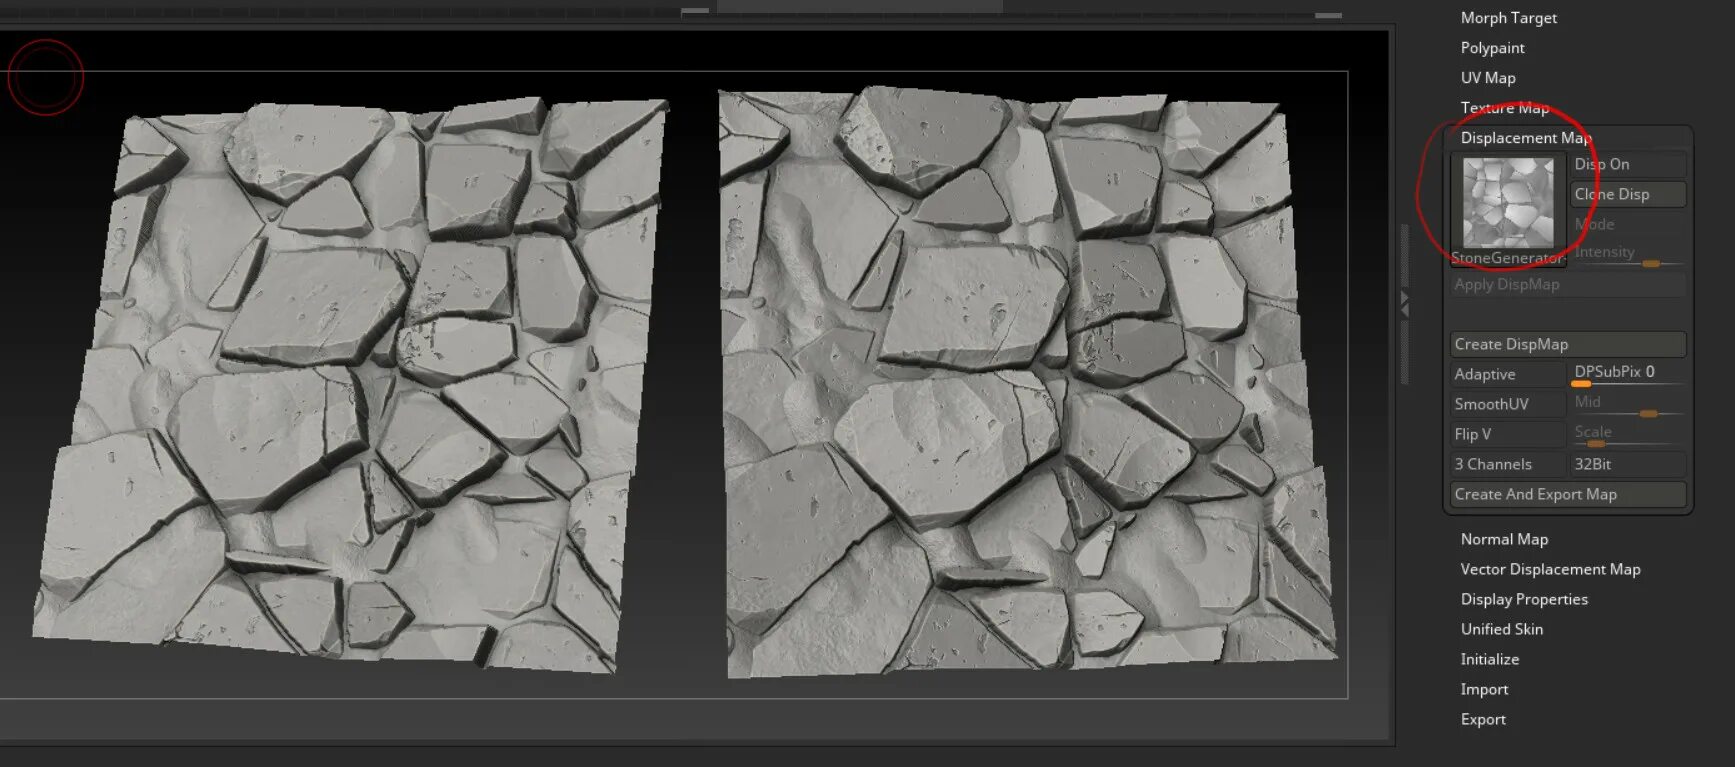 Дисплейсмент карты 3d Max. Stone displacement Map. Displace Map камни. Displace Mapping карты.